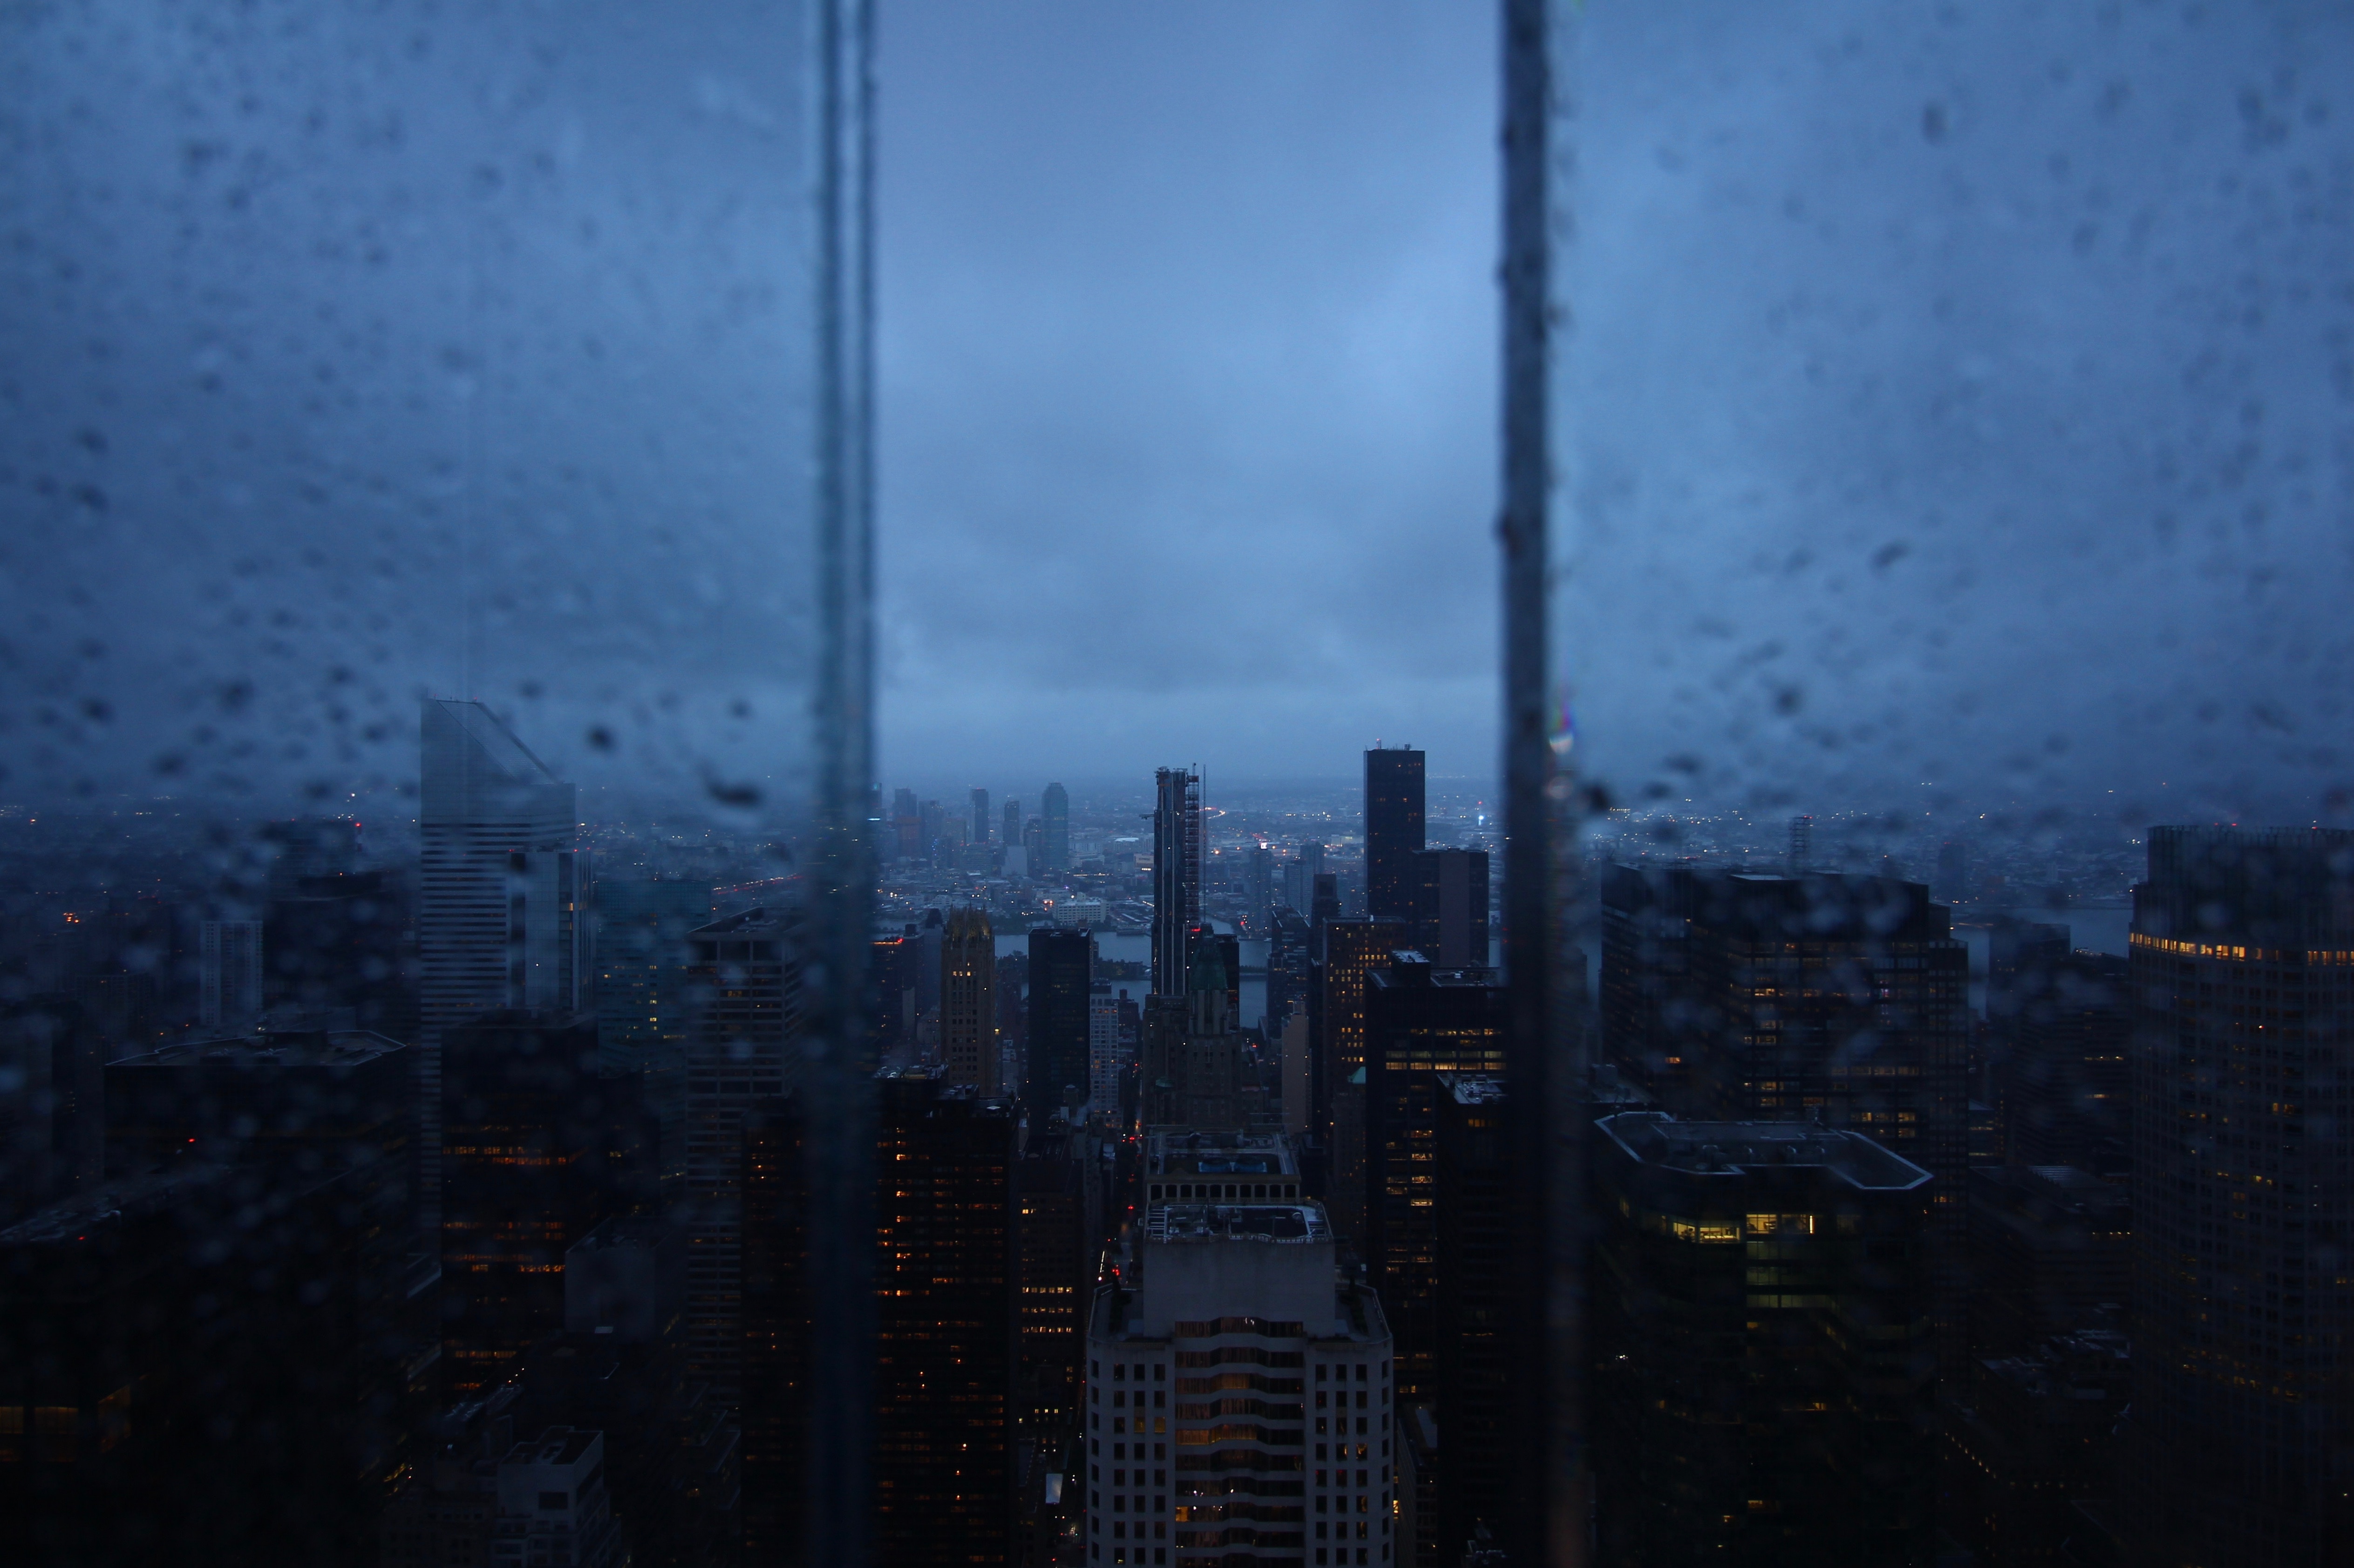 rain, skyscrapers, cities, view from above, night city, window iphone wallpaper